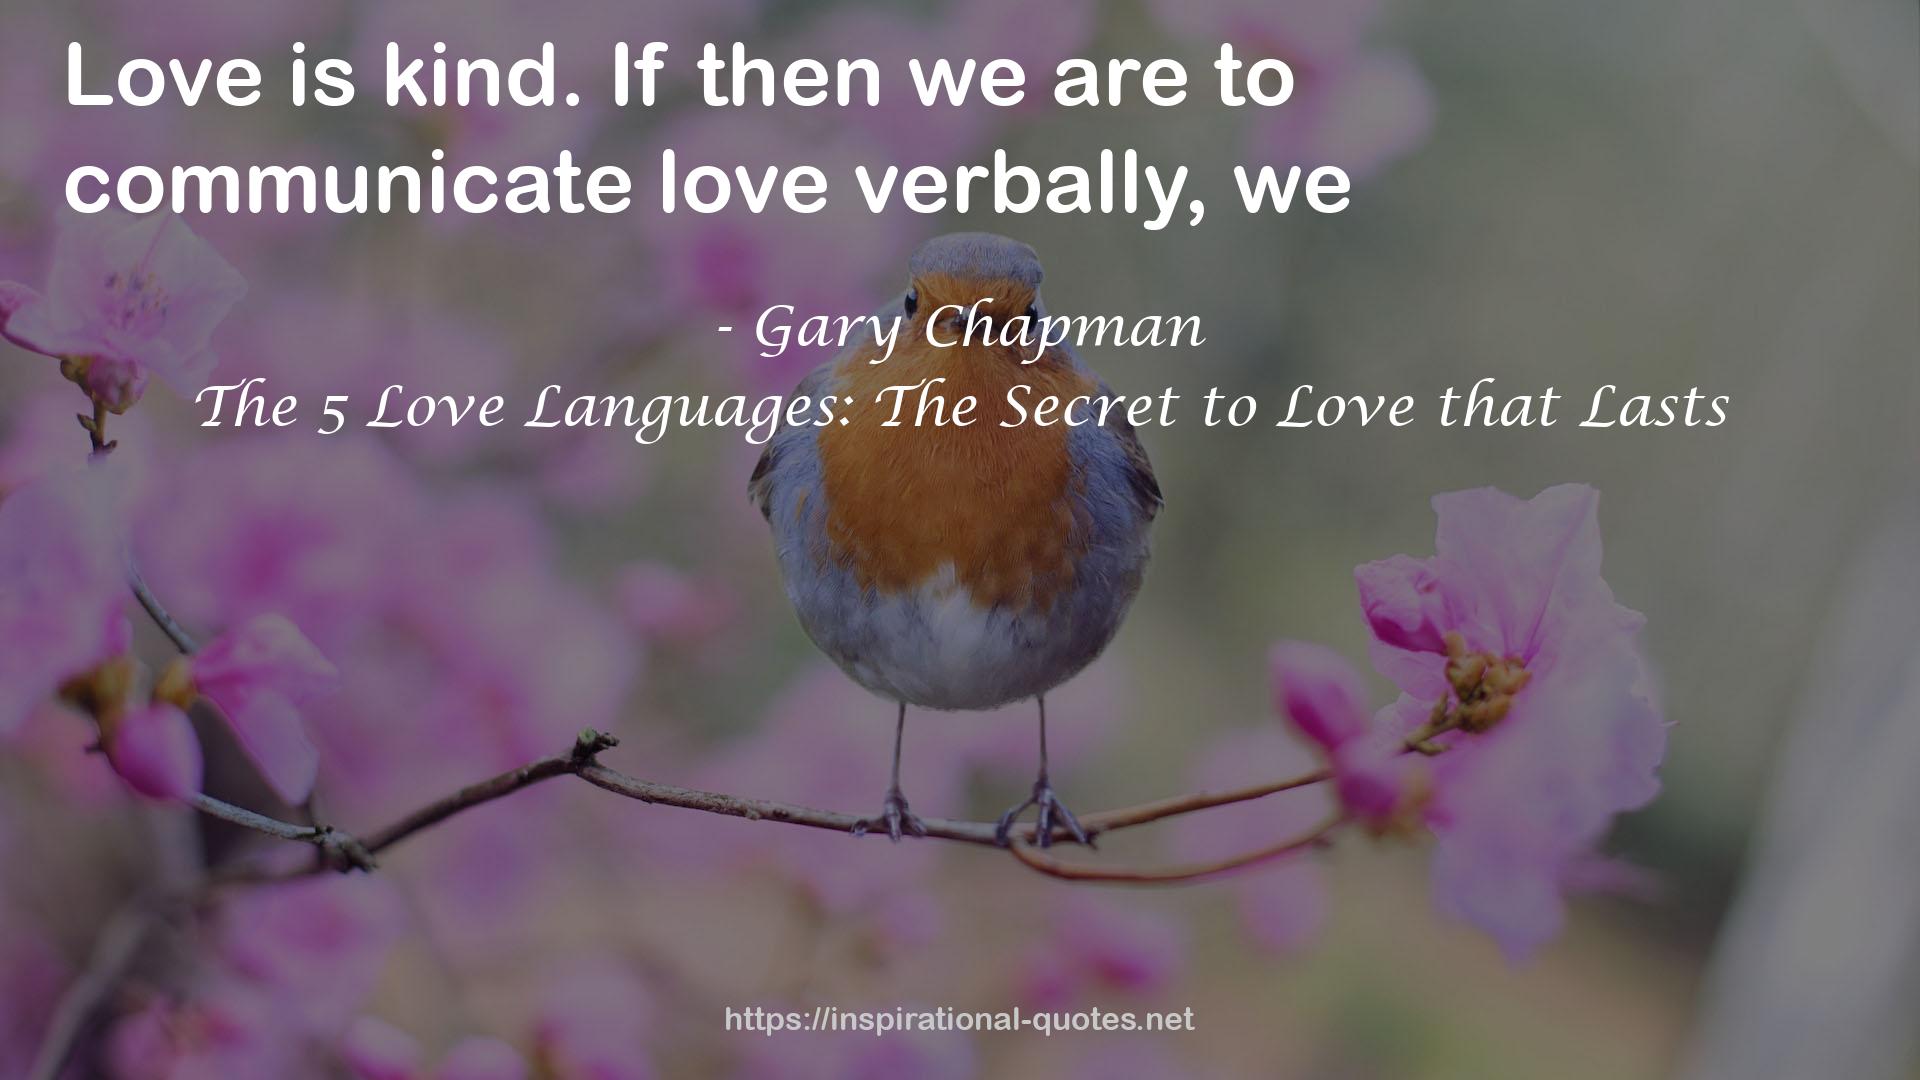 The 5 Love Languages: The Secret to Love that Lasts QUOTES